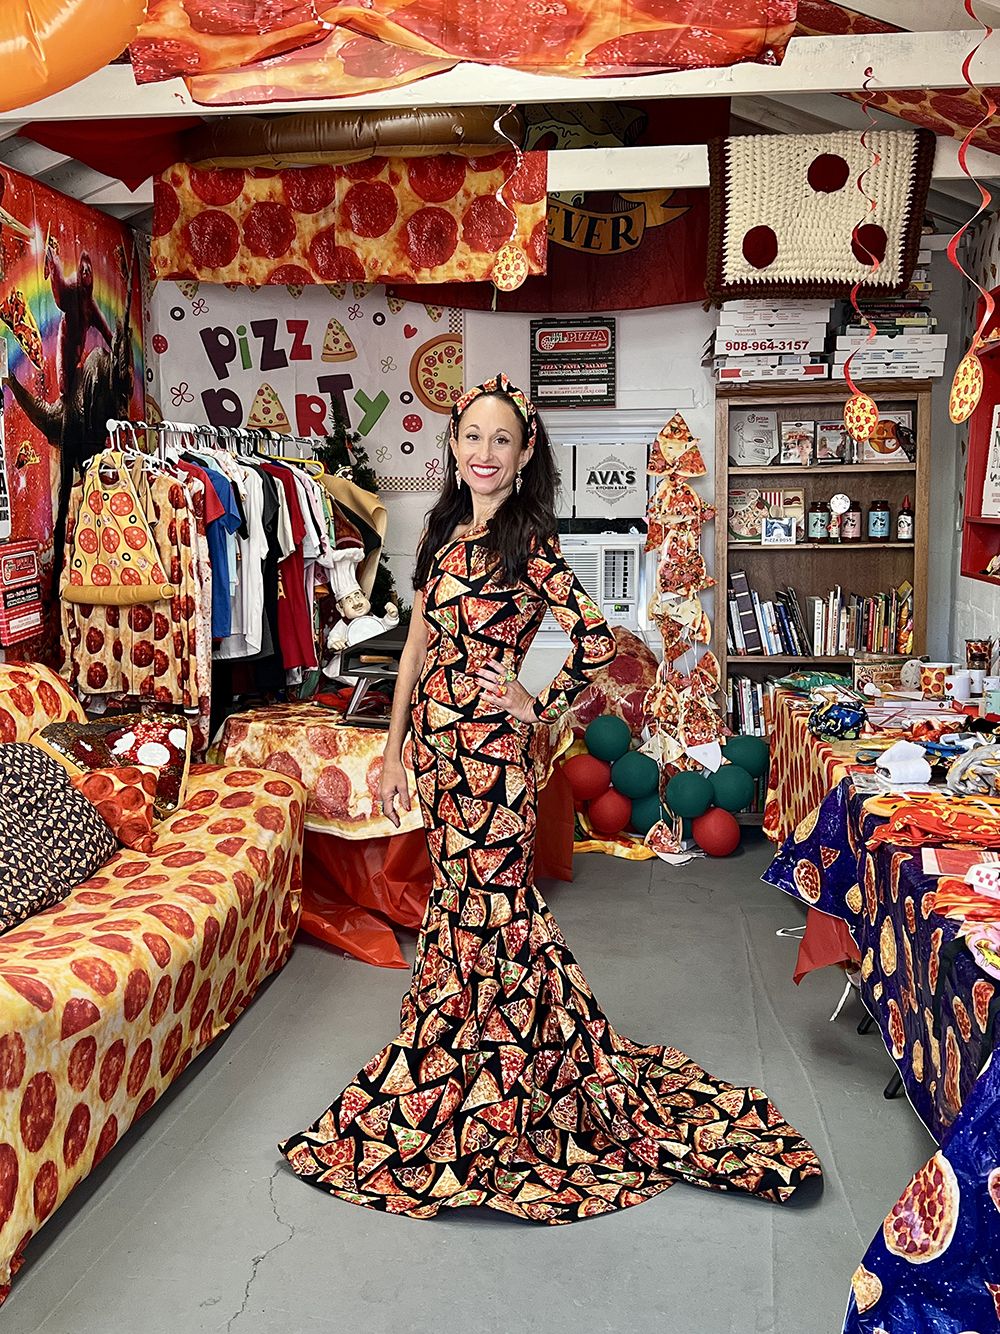 image from a Season 5 episode of MeTV's "Collector's Call." Telina Cuppari, who collections pizza-related items, is modeling her "pizza dress" as she smiles and is surrounded by various other pizza-themed objects from her collection.